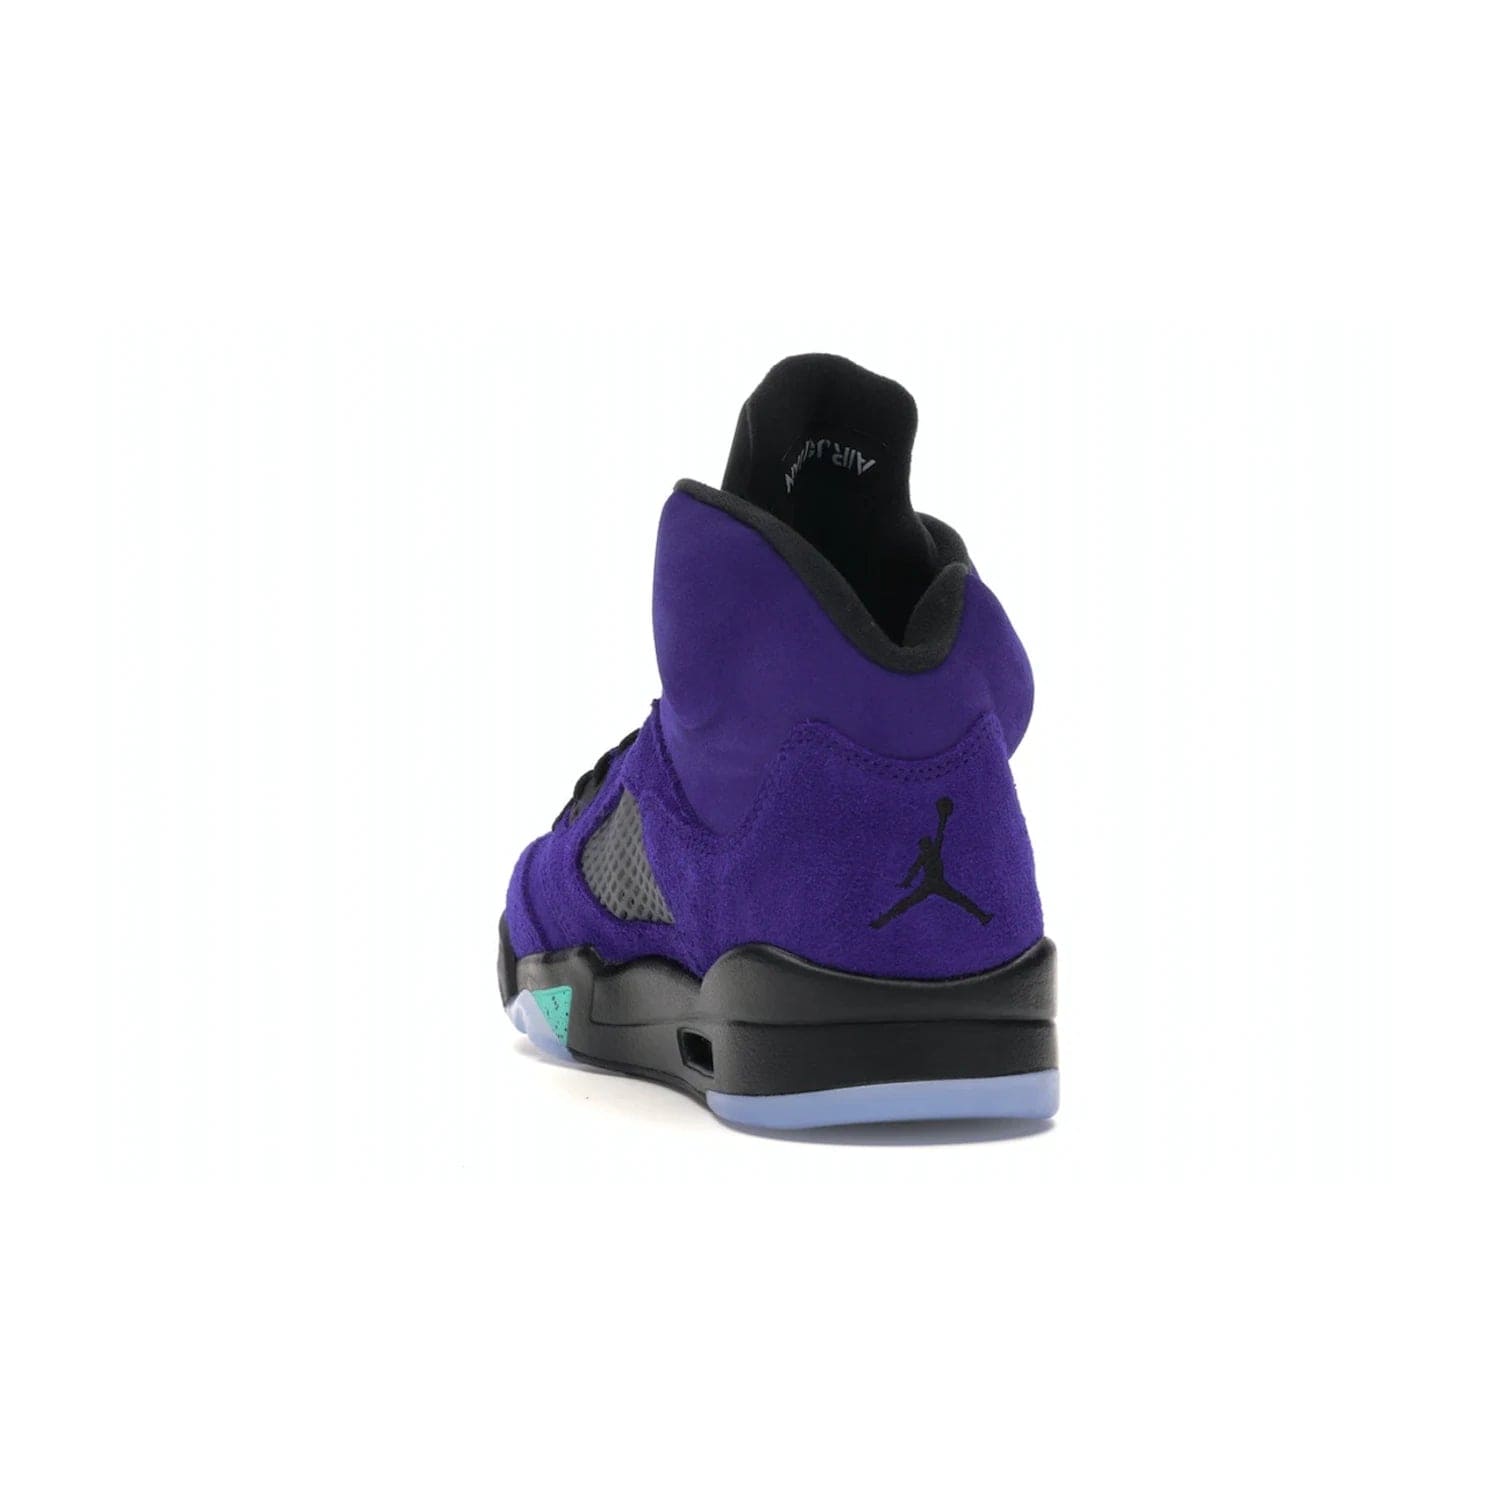 Jordan 5 Retro Alternate Grape - Image 26 - Only at www.BallersClubKickz.com - Bring the classic Jordan 5 Retro Alternate Grape to your sneaker collection! Featuring a purple suede upper, charcoal underlays, green detailing, and an icy and green outsole. Releasing for the first time since 1990, don't miss this chance to add a piece of sneaker history to your collection.